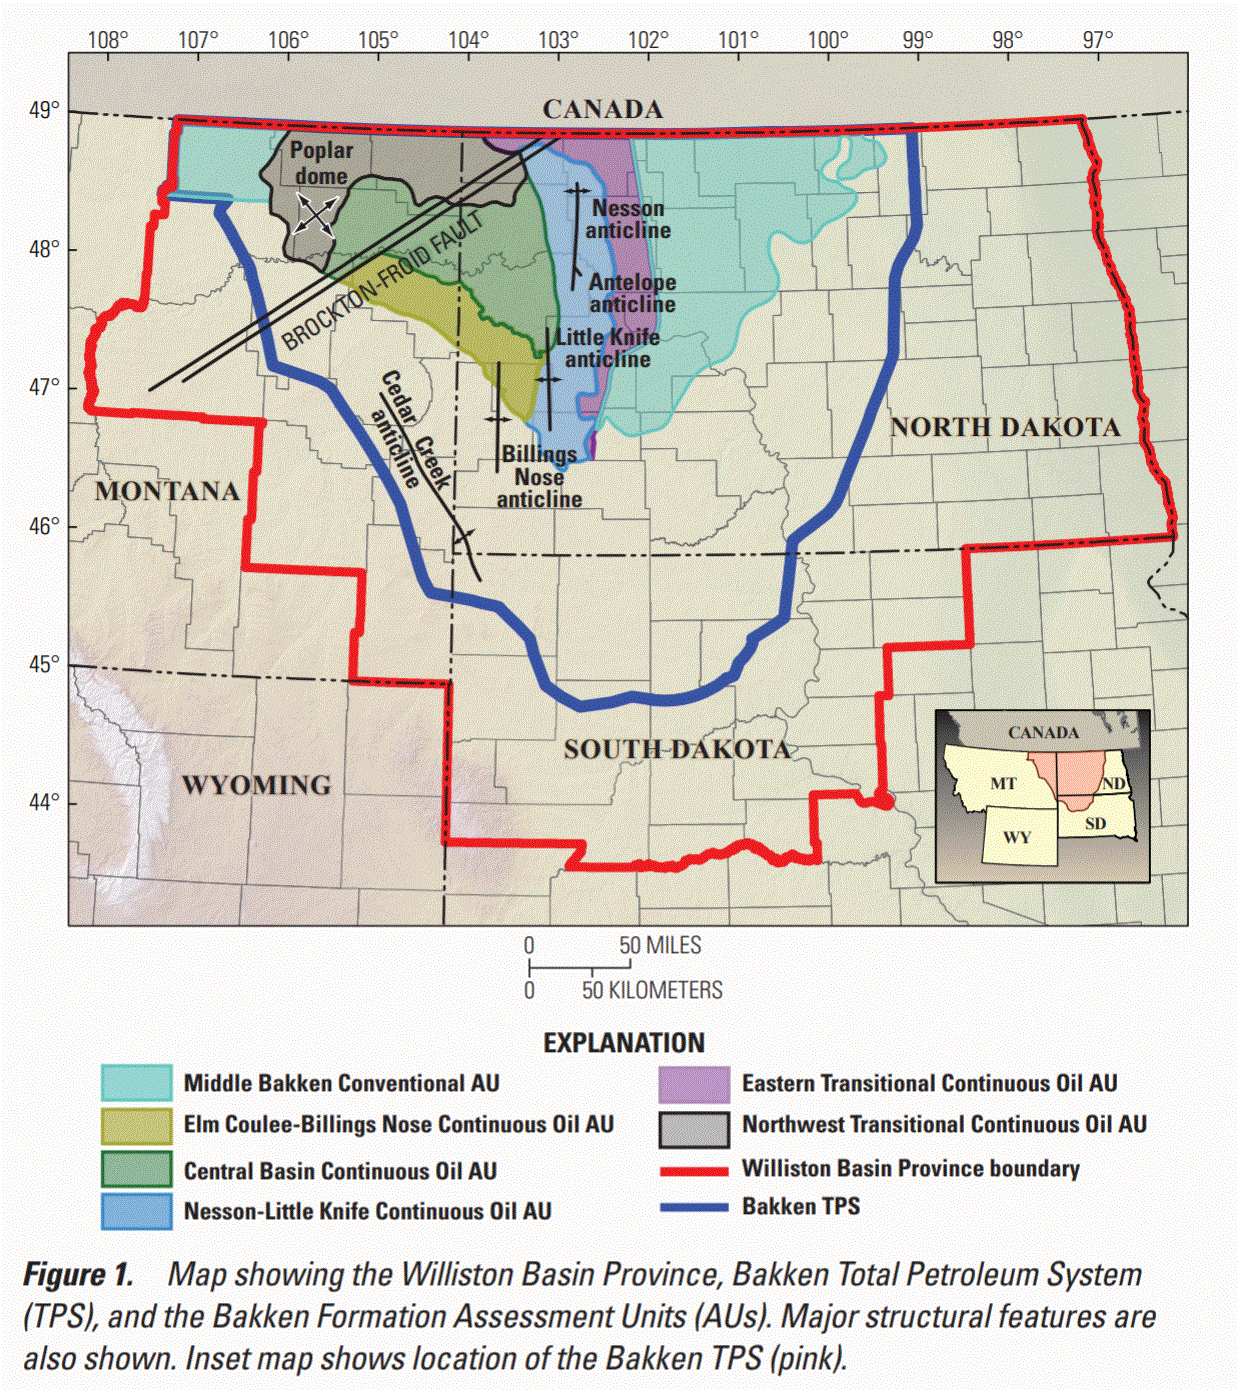 You are currently viewing MRP 134: Overview of the Williston Basin and Bakken Shale